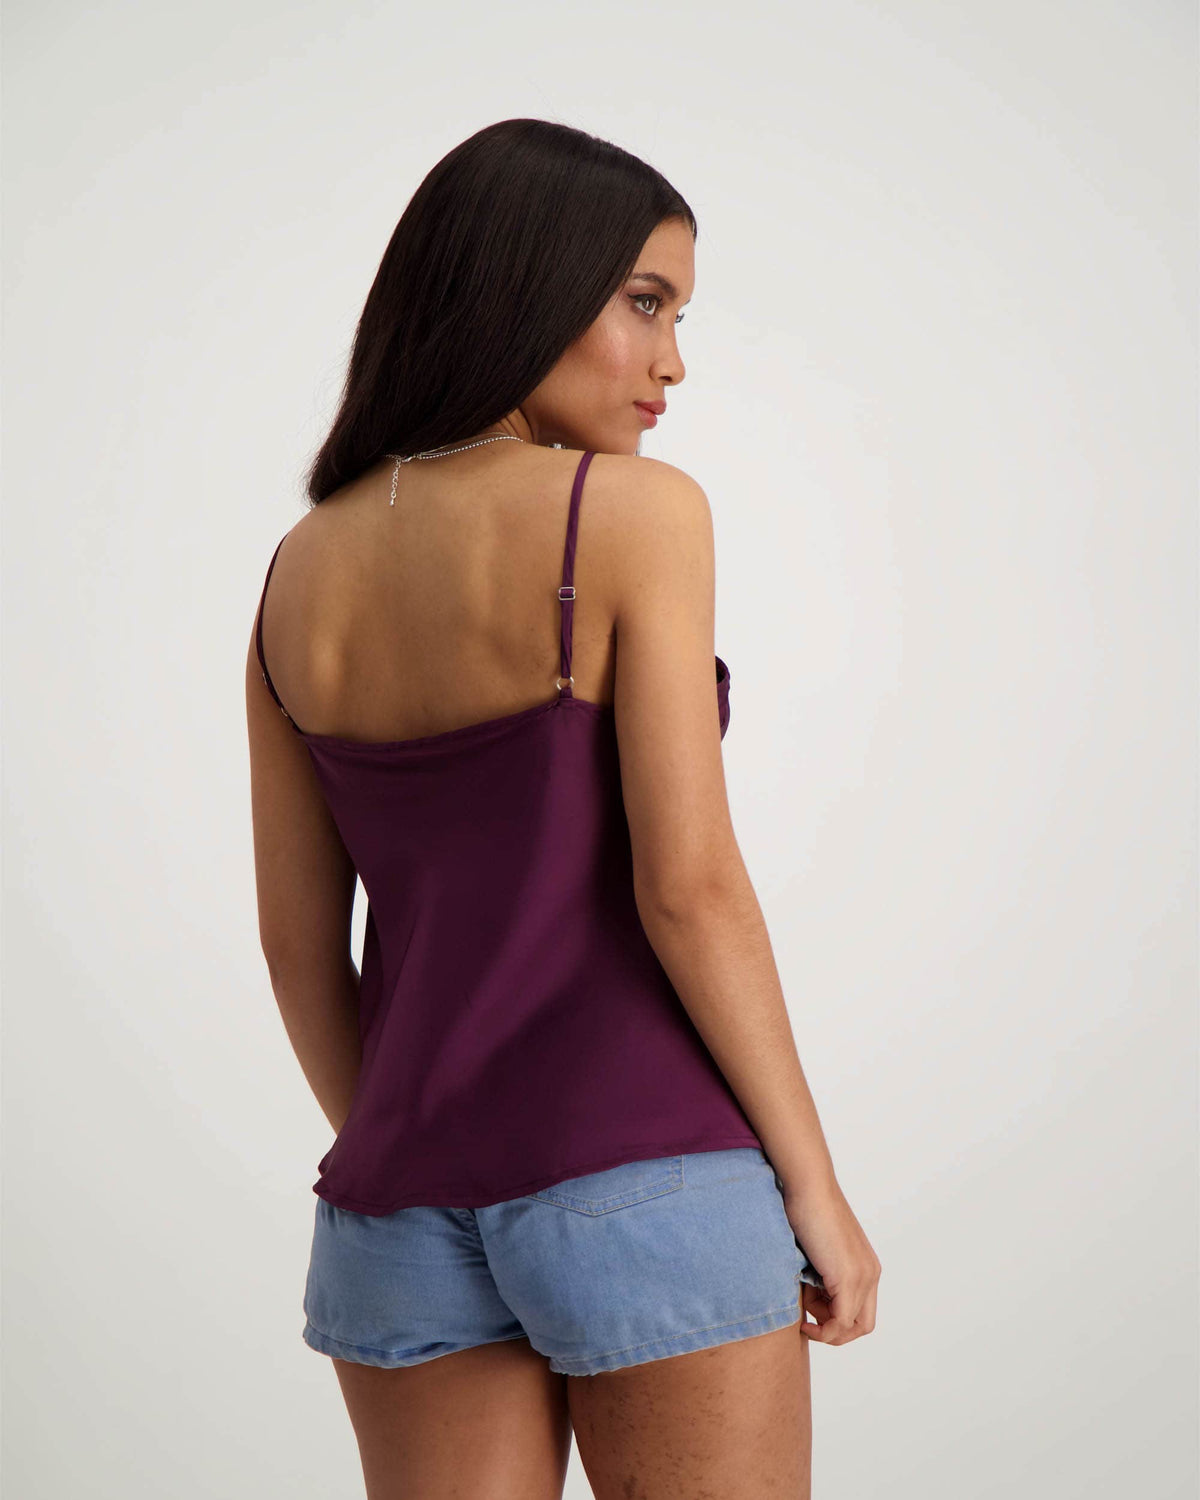 Burgundy cowl neck cami looks and feels gorgeous. Fashioned from silky smooth Armani satin